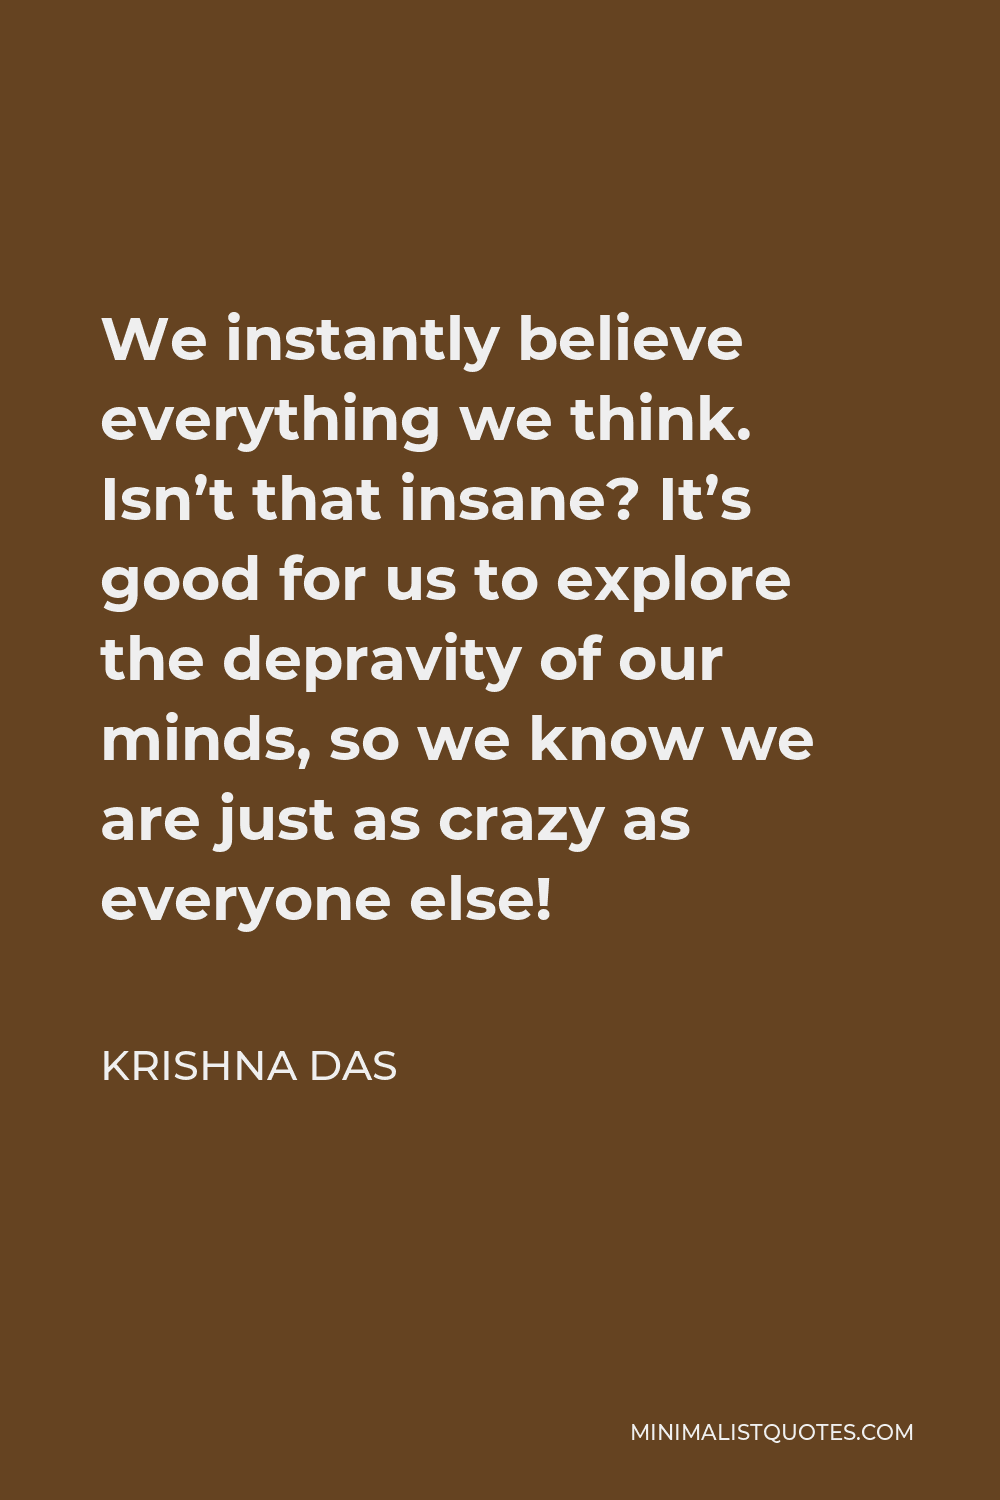 Krishna Das Quote - We instantly believe everything we think. Isn’t that insane? It’s good for us to explore the depravity of our minds, so we know we are just as crazy as everyone else!